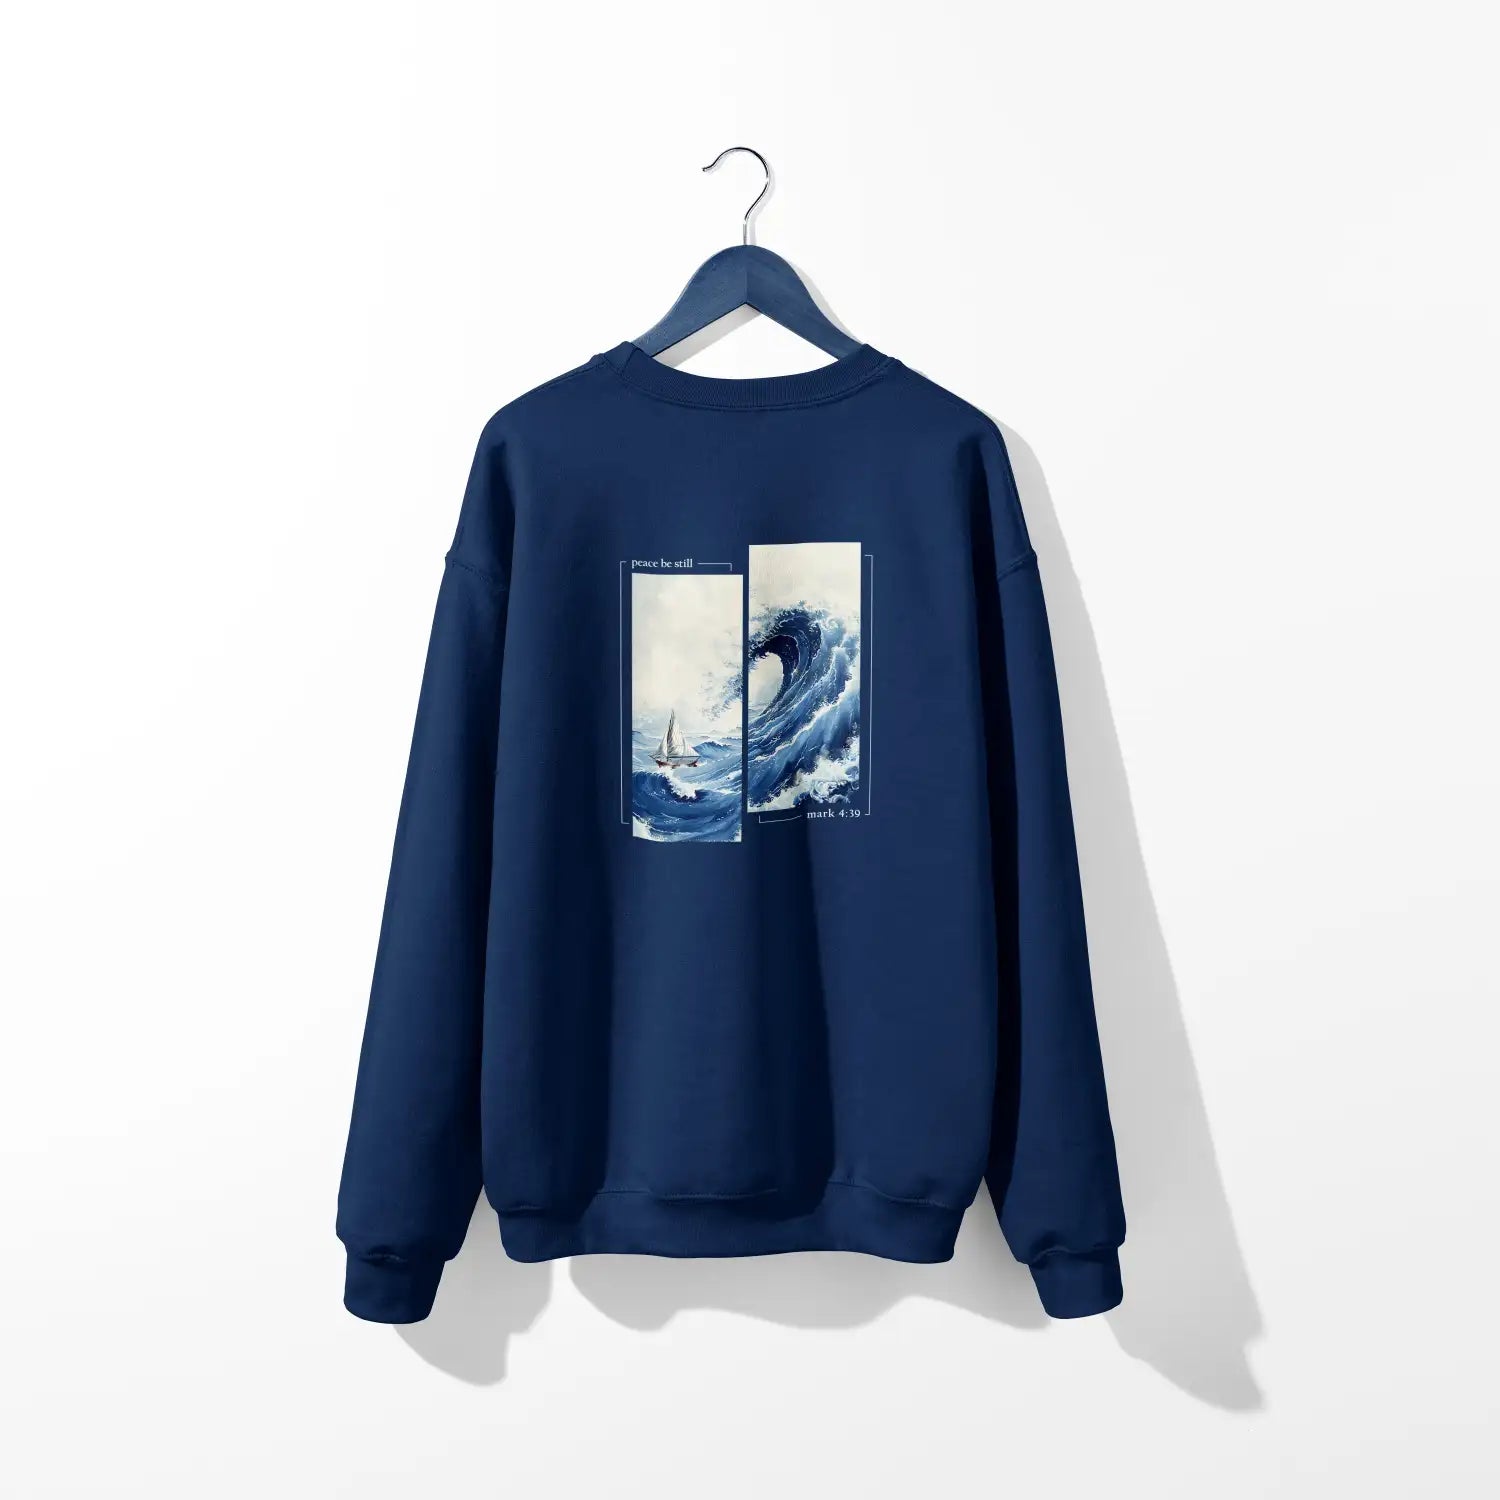 A Peace Be Still sweatshirt with an image of a wave on it, featuring the Be Still and Know Logo.